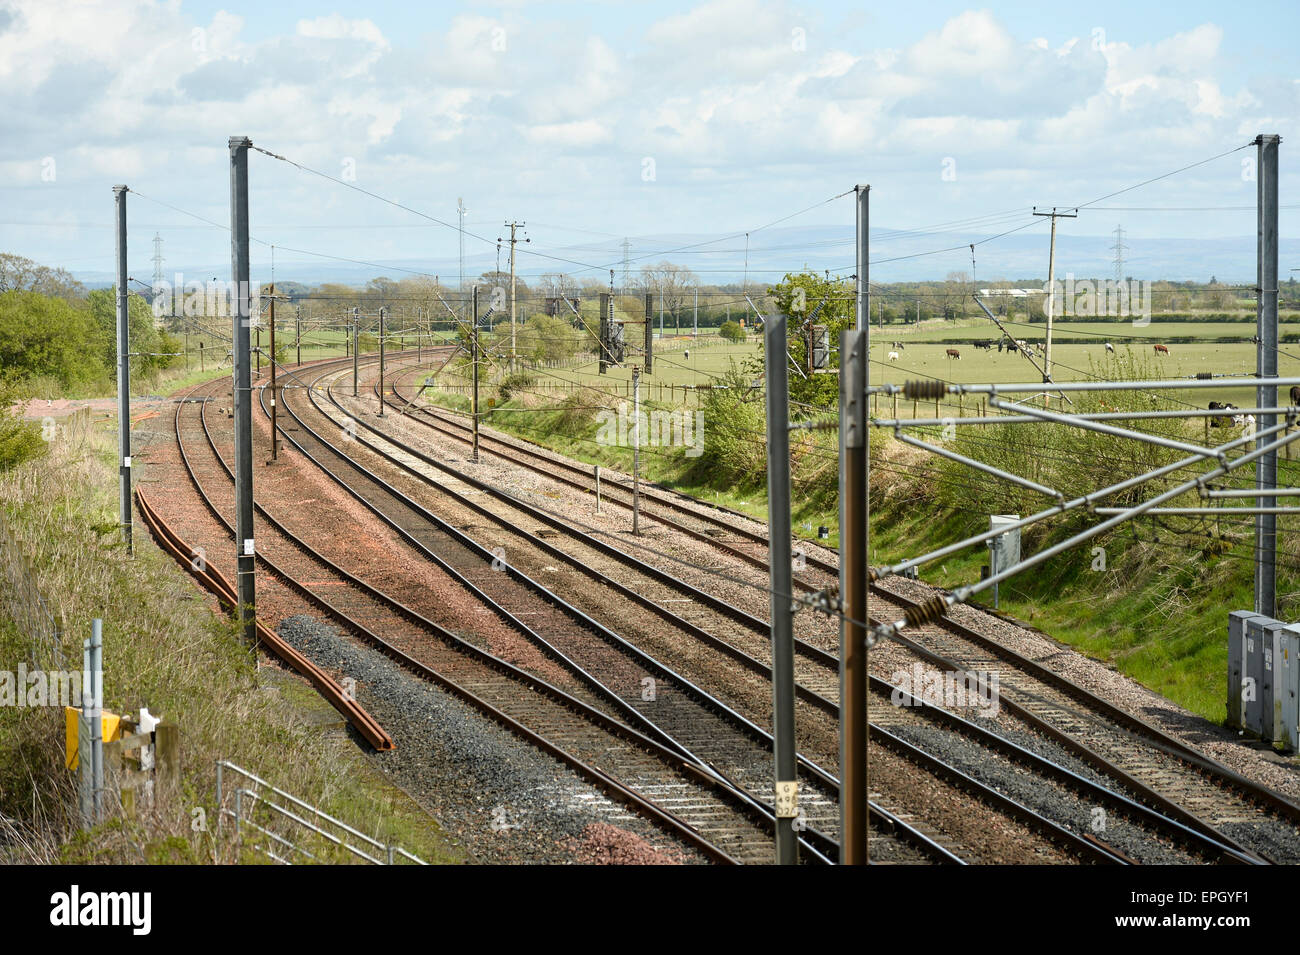 Scotland, UK. 18th May, 2015. Quintinshill near Gretna Green. Friday 22nd May marks 100 years since the largest rail disaster in British history when three trains collided at Quintinshill. One of the trains was a troop train carrying soldiers of the 7th Battalion Royal Scots deploying to the World War One battlefields of Galipolli. Over 220 people died that day most were soldiers onboard the troop train: 18 May 2015.  Credit:  STUART WALKER/Alamy Live News Stock Photo